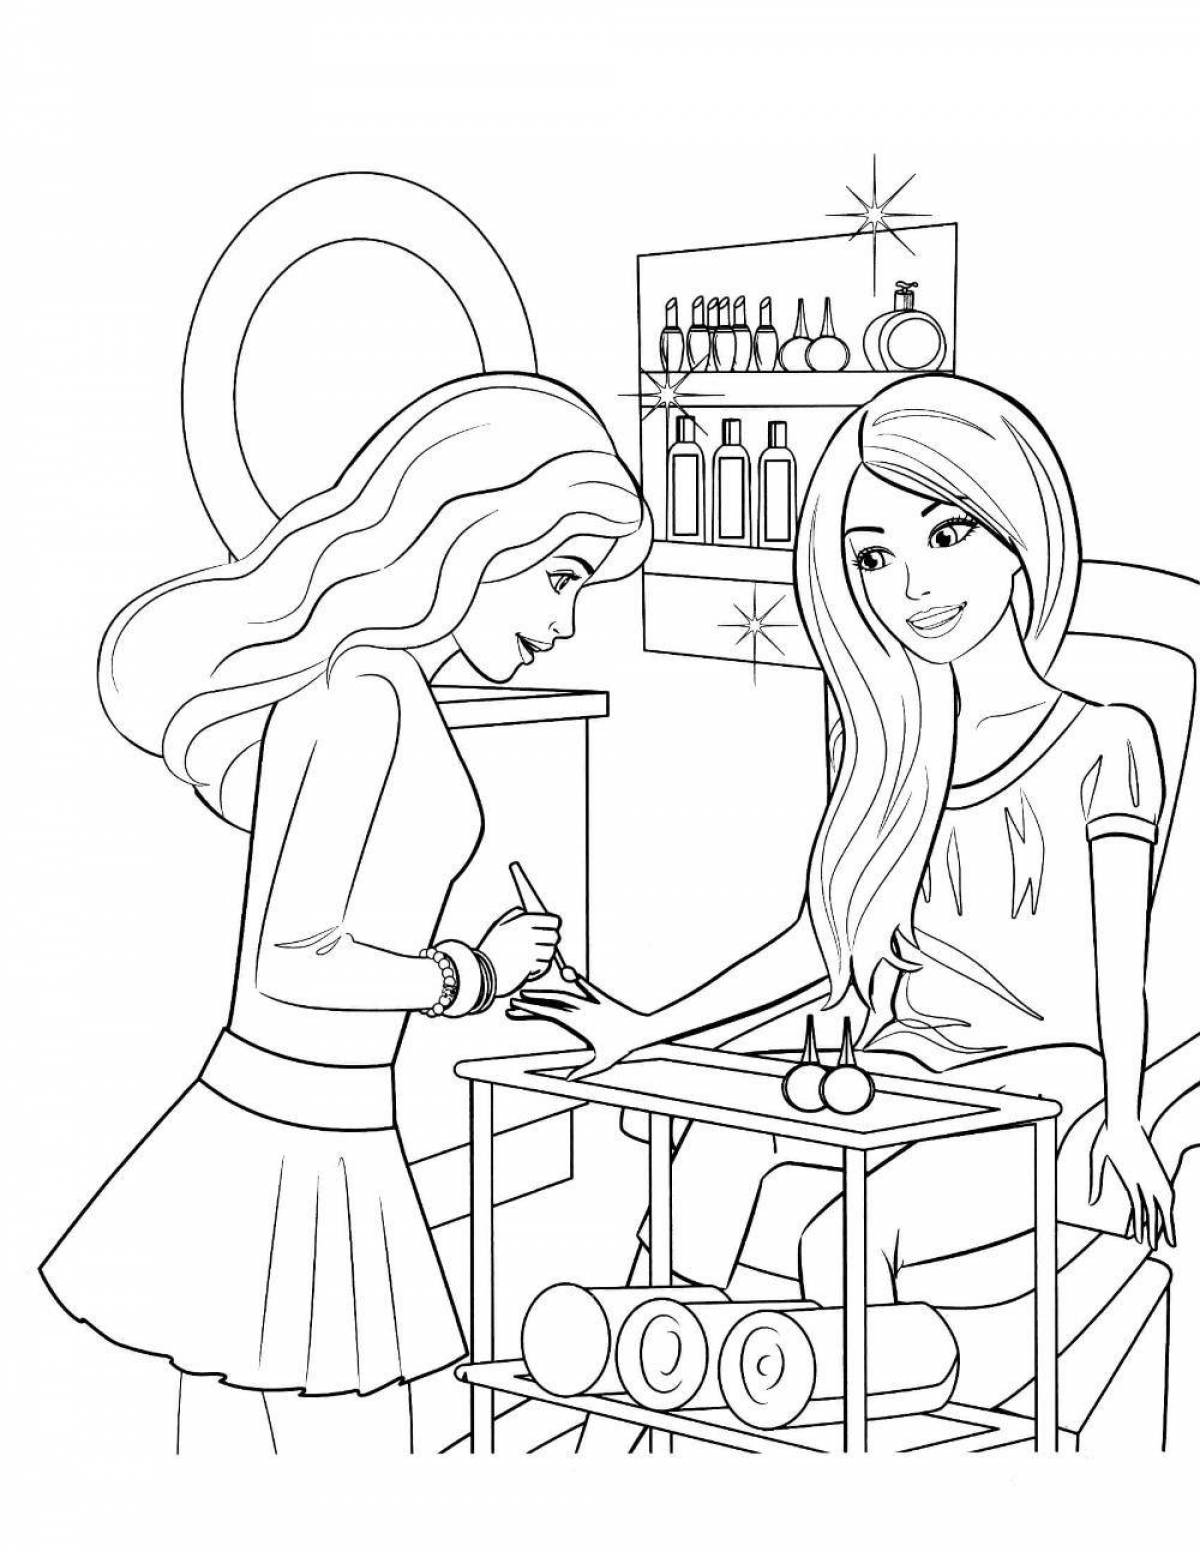 Barbie style coloring book